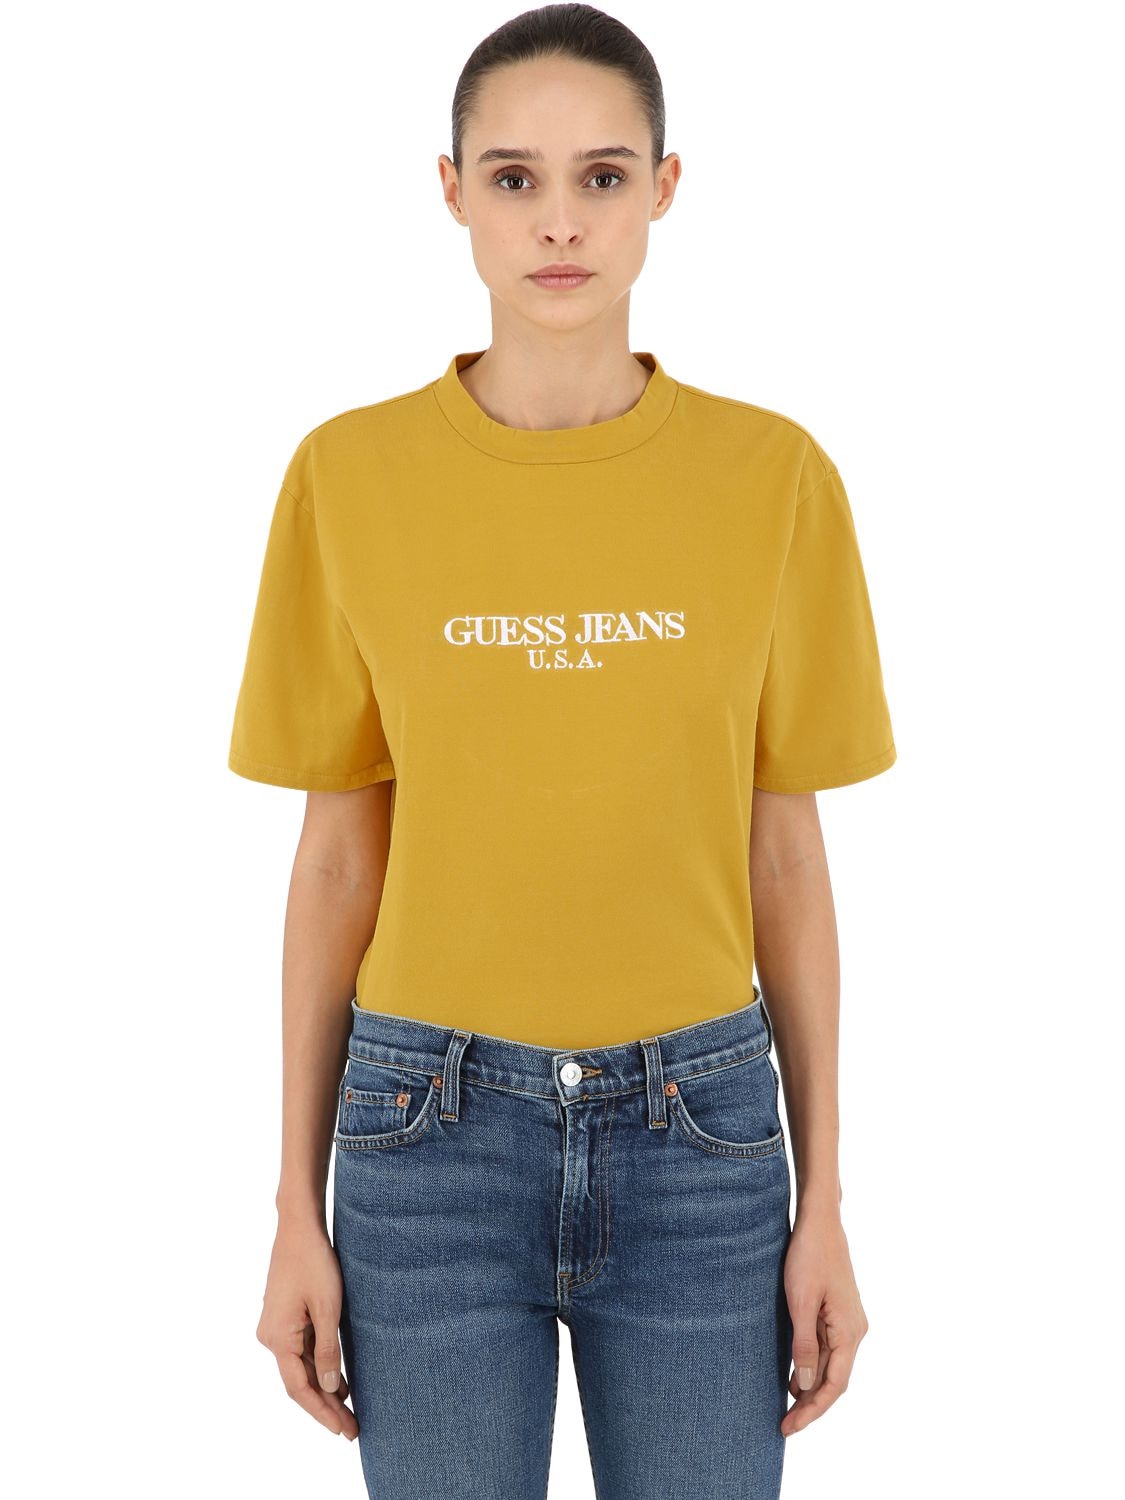 Guess Jeans U.s.a. "sean Wotherspoon"logo印图t恤 In Yellow